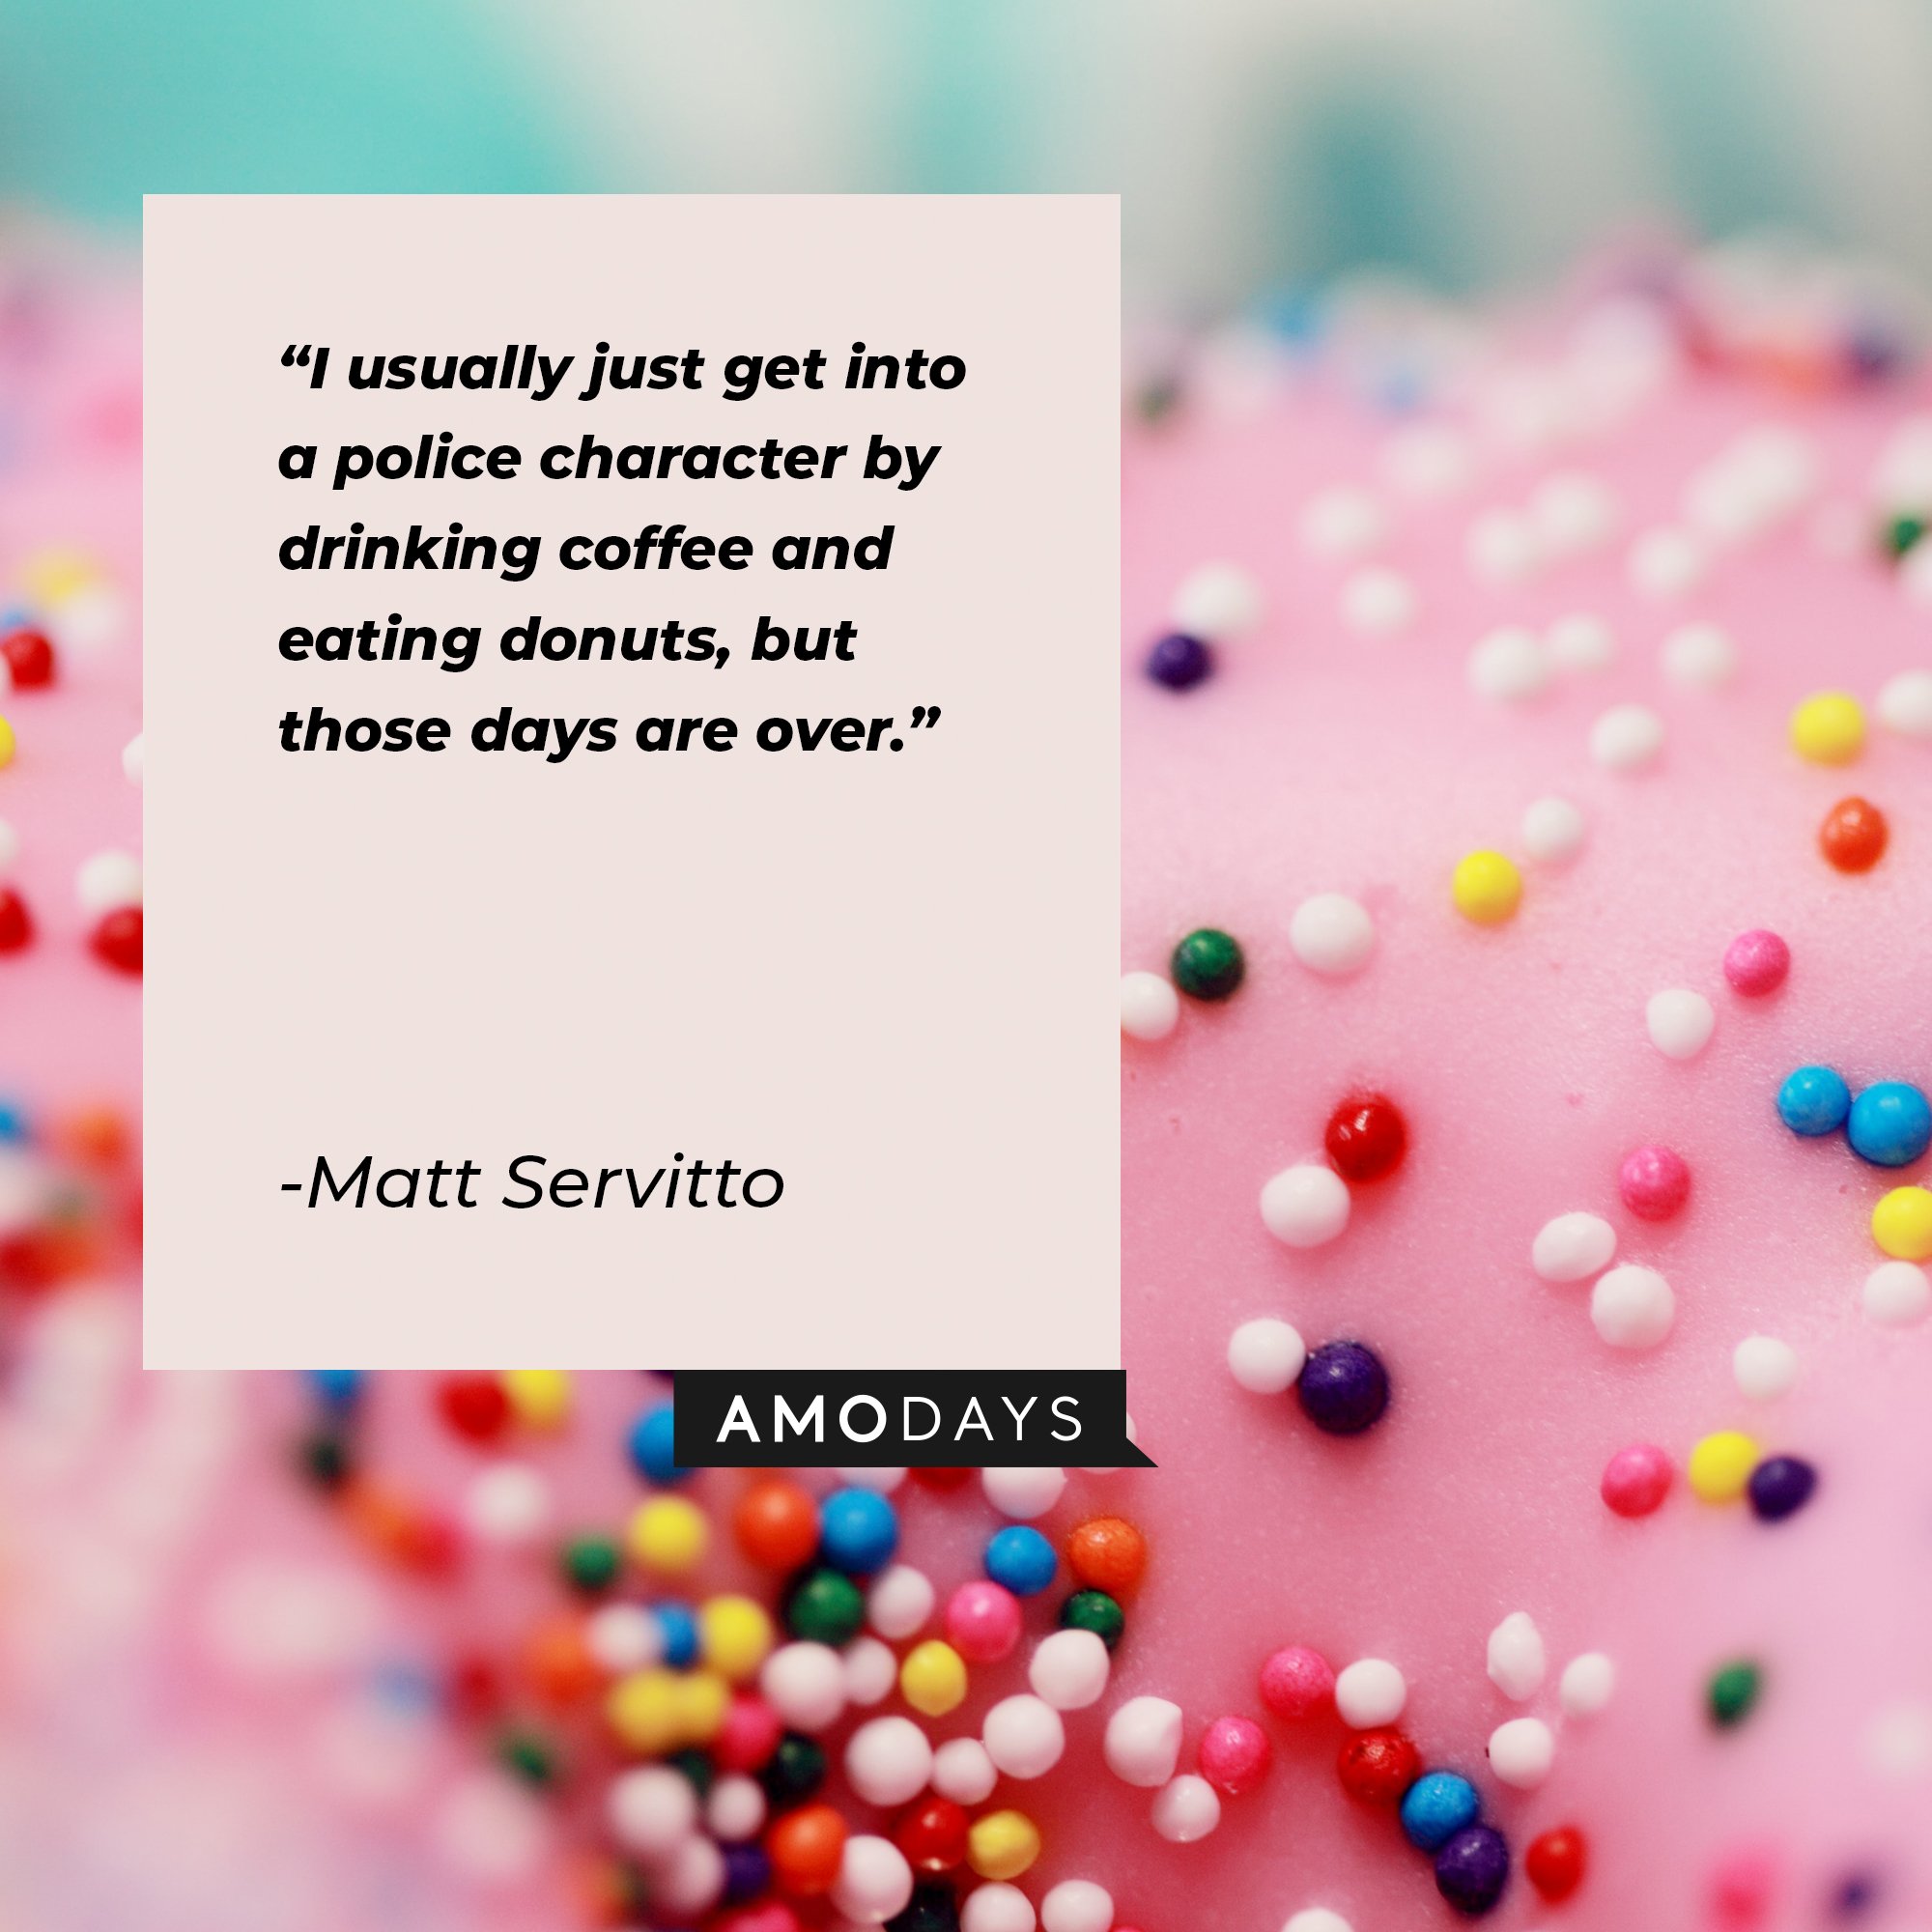 Matt Servitto's quote: "I usually just get into a police character by drinking coffee and eating donuts, but those days are over." | Image: AmoDays